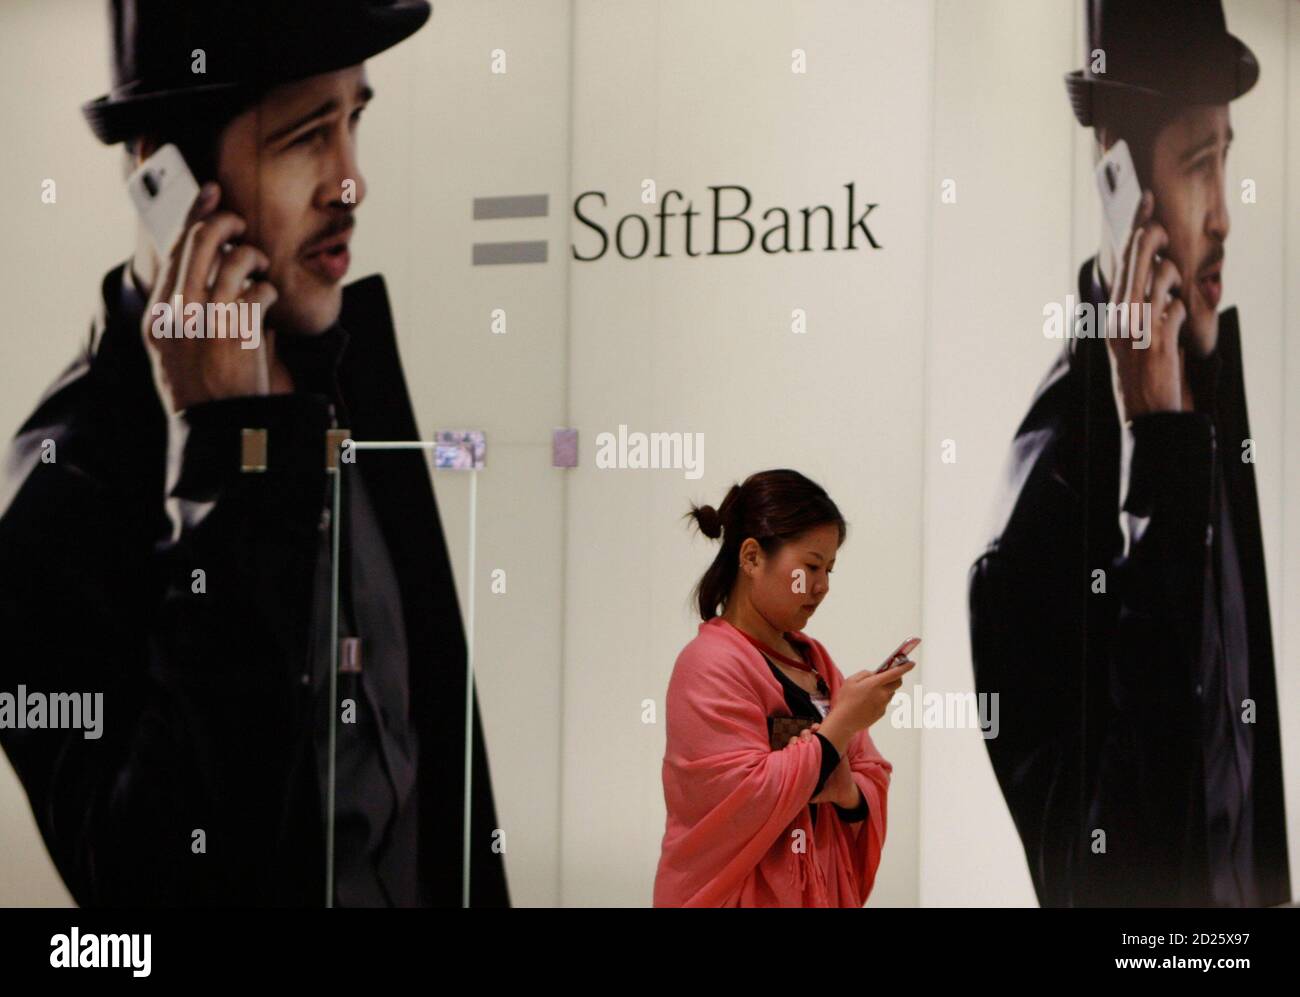 A woman using a mobile phone walks past an advertisement board of Softbank Corp in Tokyo February 5, 2009. Softbank Corp, Japan's No.3 mobile phone operator, posted a 2.4 percent rise in quarterly profit as a drop in cellphone sales lowered its subsidy payments, and it stuck to its full-year forecast.   REUTERS/Toru Hanai (JAPAN) Stock Photo